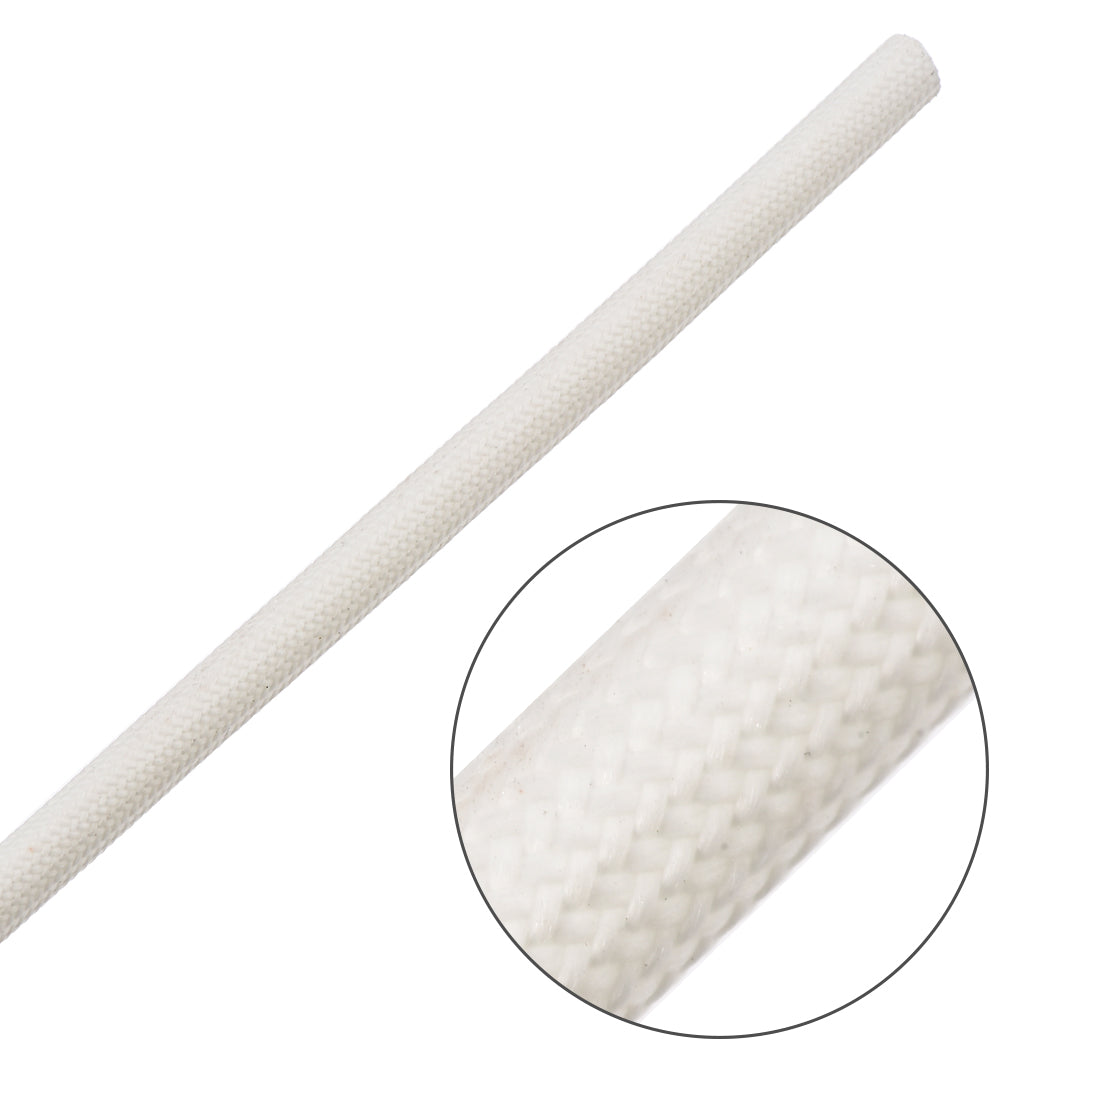 uxcell Uxcell Insulation Cable Protector,16.4Ft-5mm High TEMP Silicone Fiberglass Sleeve White